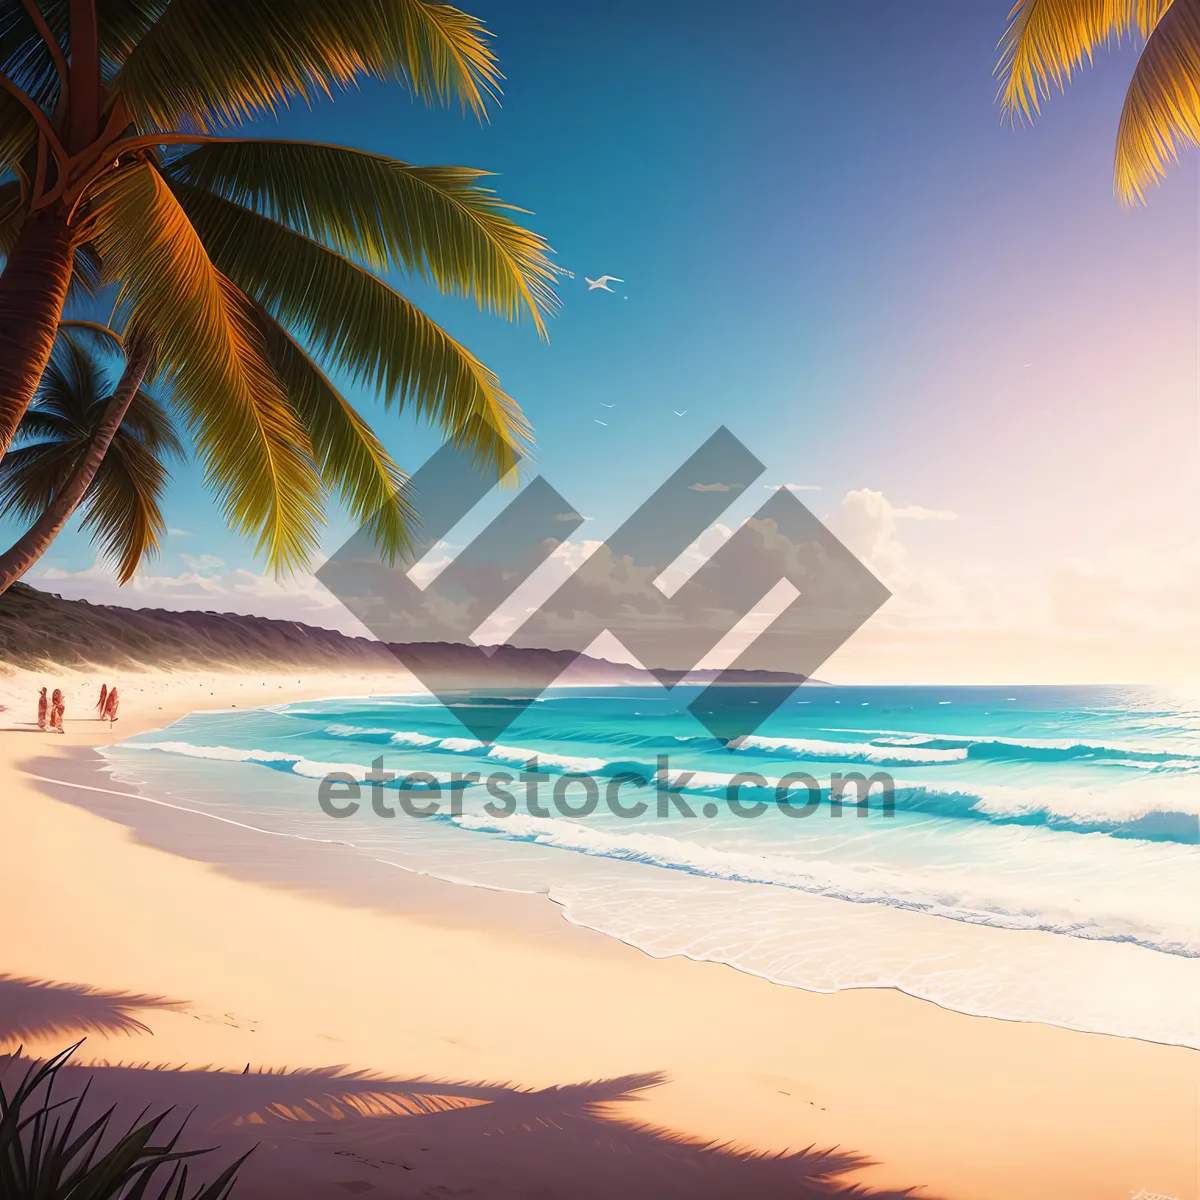 Picture of Turquoise shores and palm tree paradise